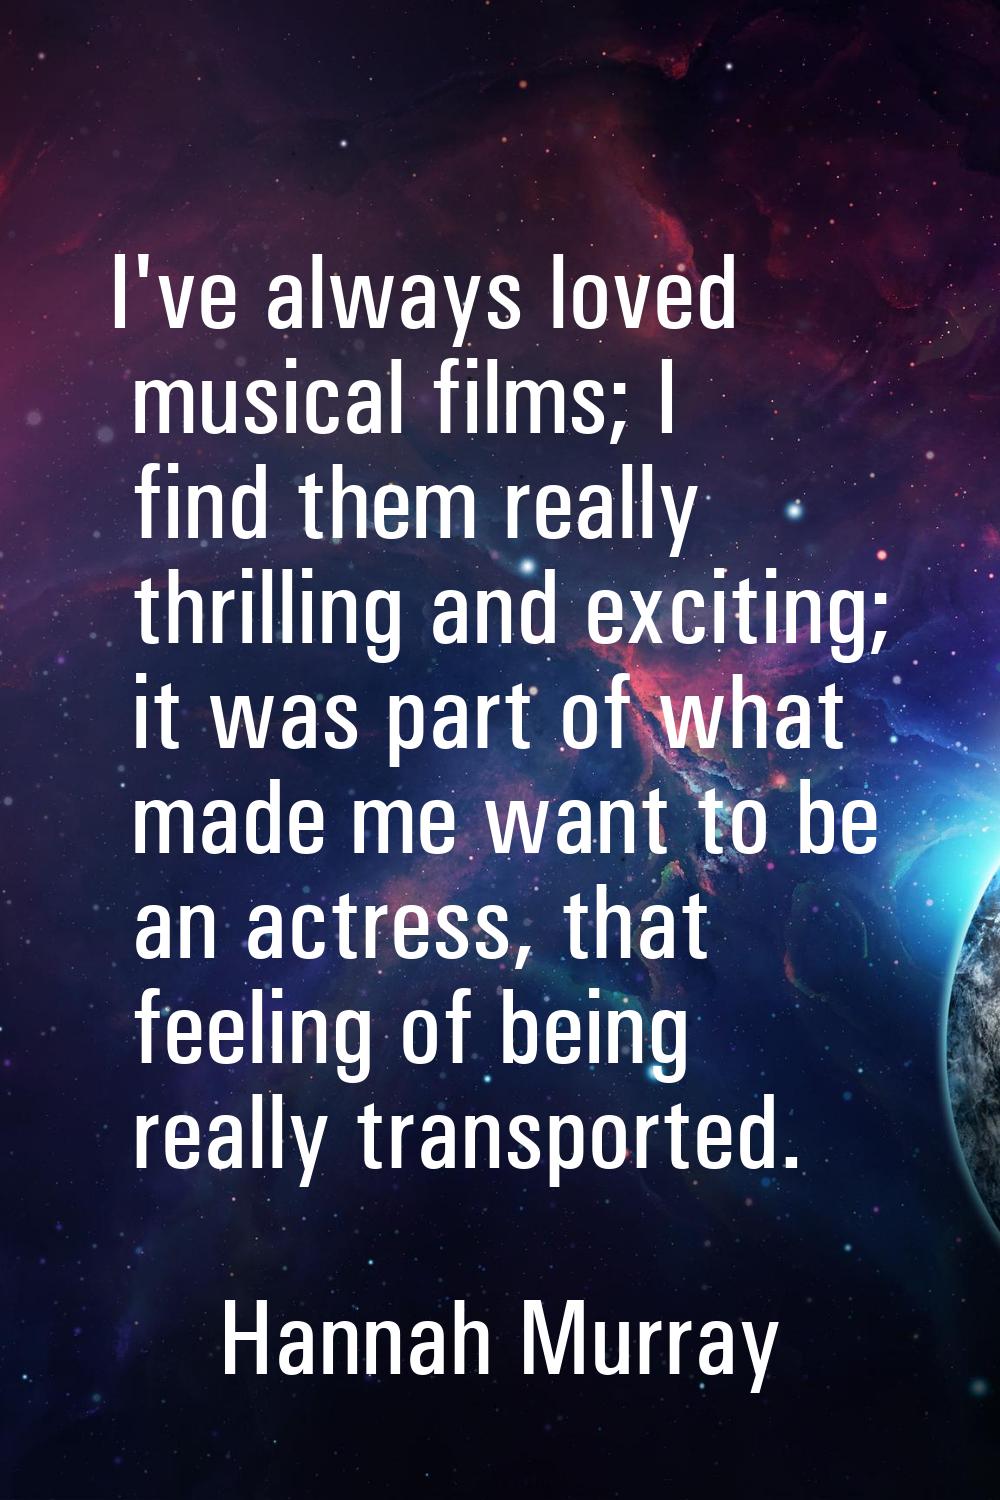 I've always loved musical films; I find them really thrilling and exciting; it was part of what mad